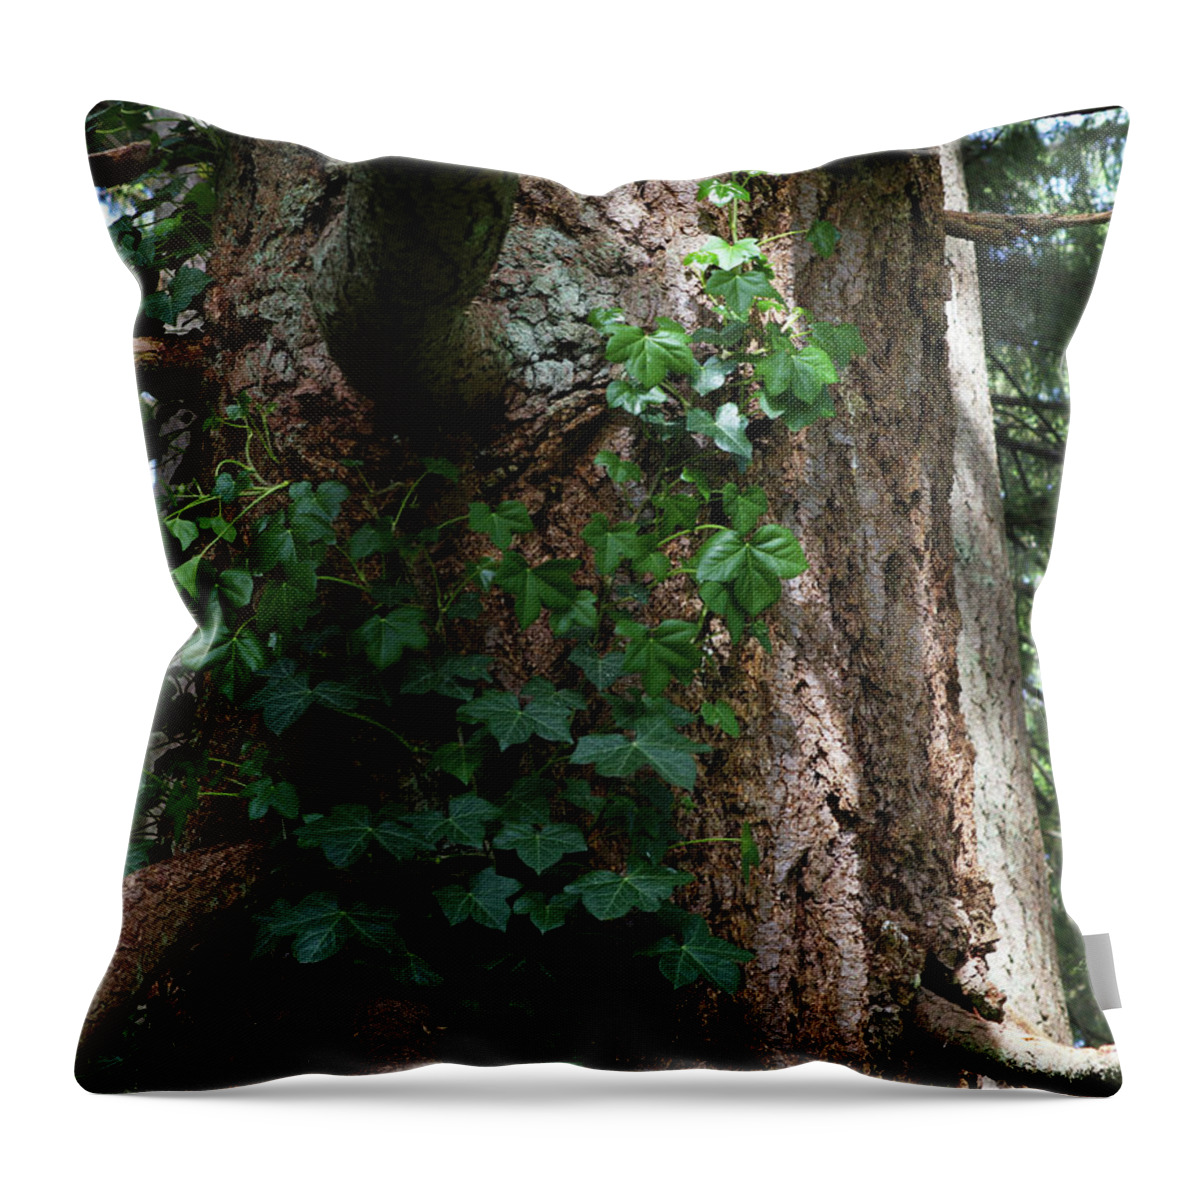 Ivy Throw Pillow featuring the photograph Ivy On The Hemlock by Jeanette C Landstrom